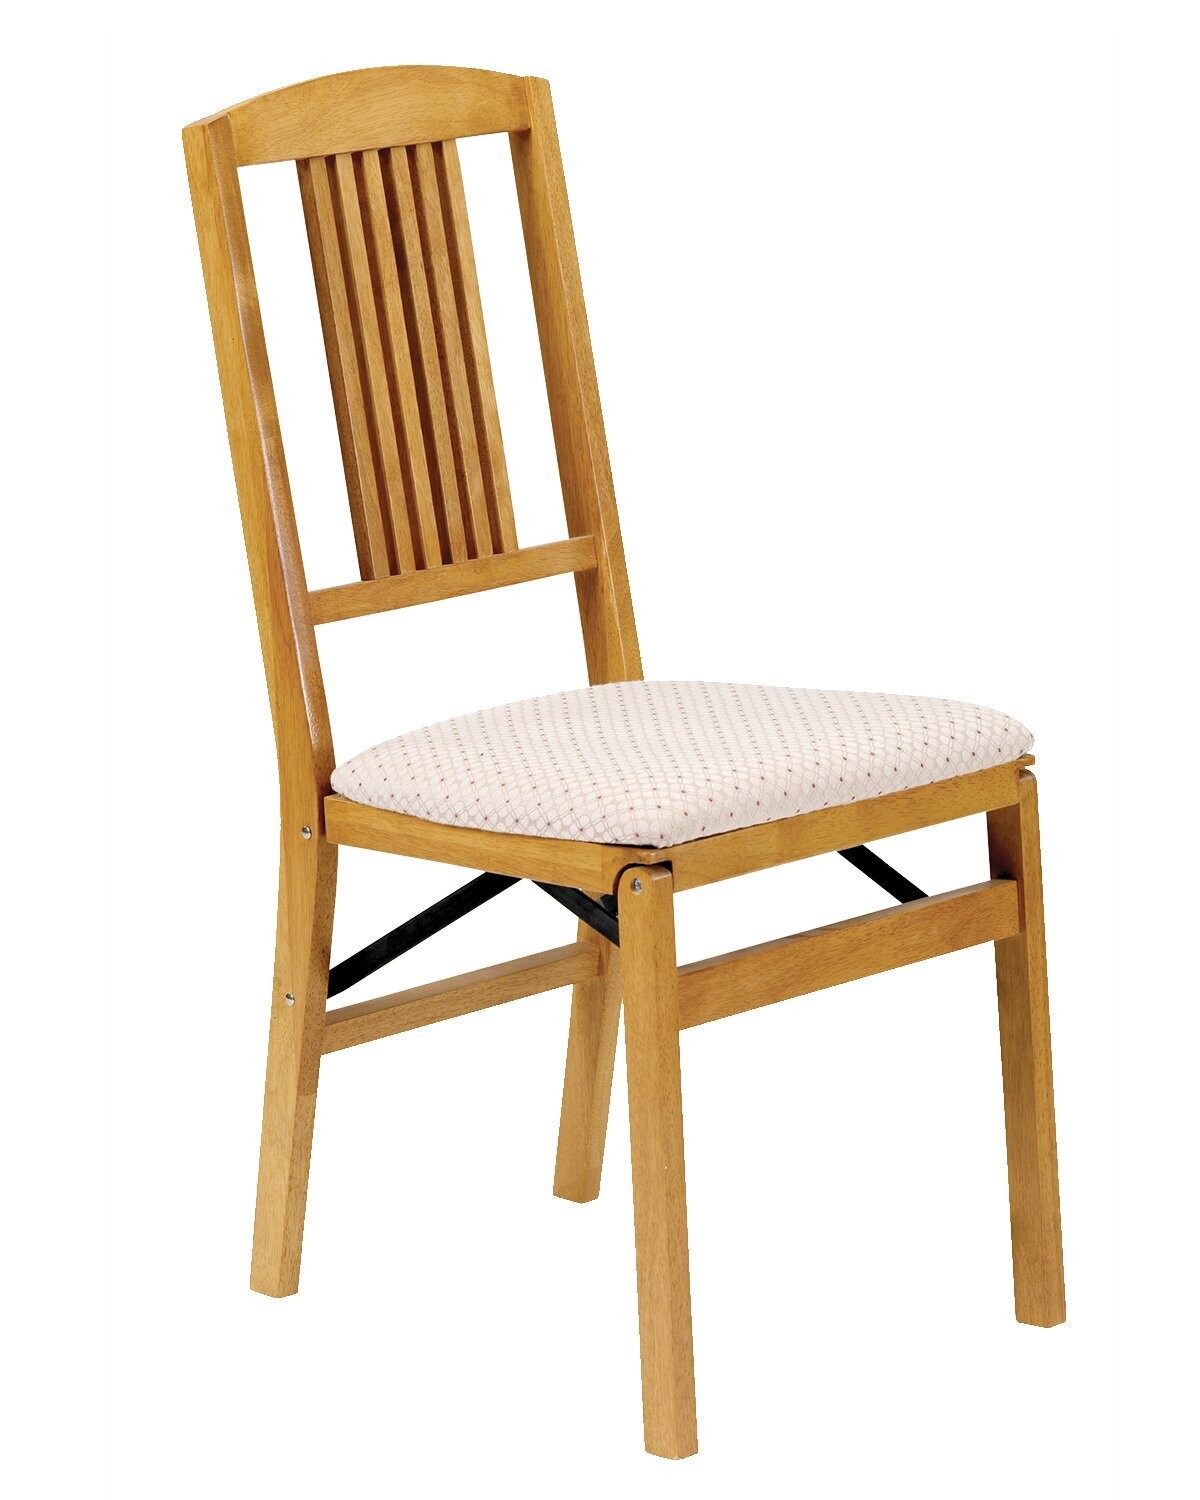 Upholstered folding dining chairs